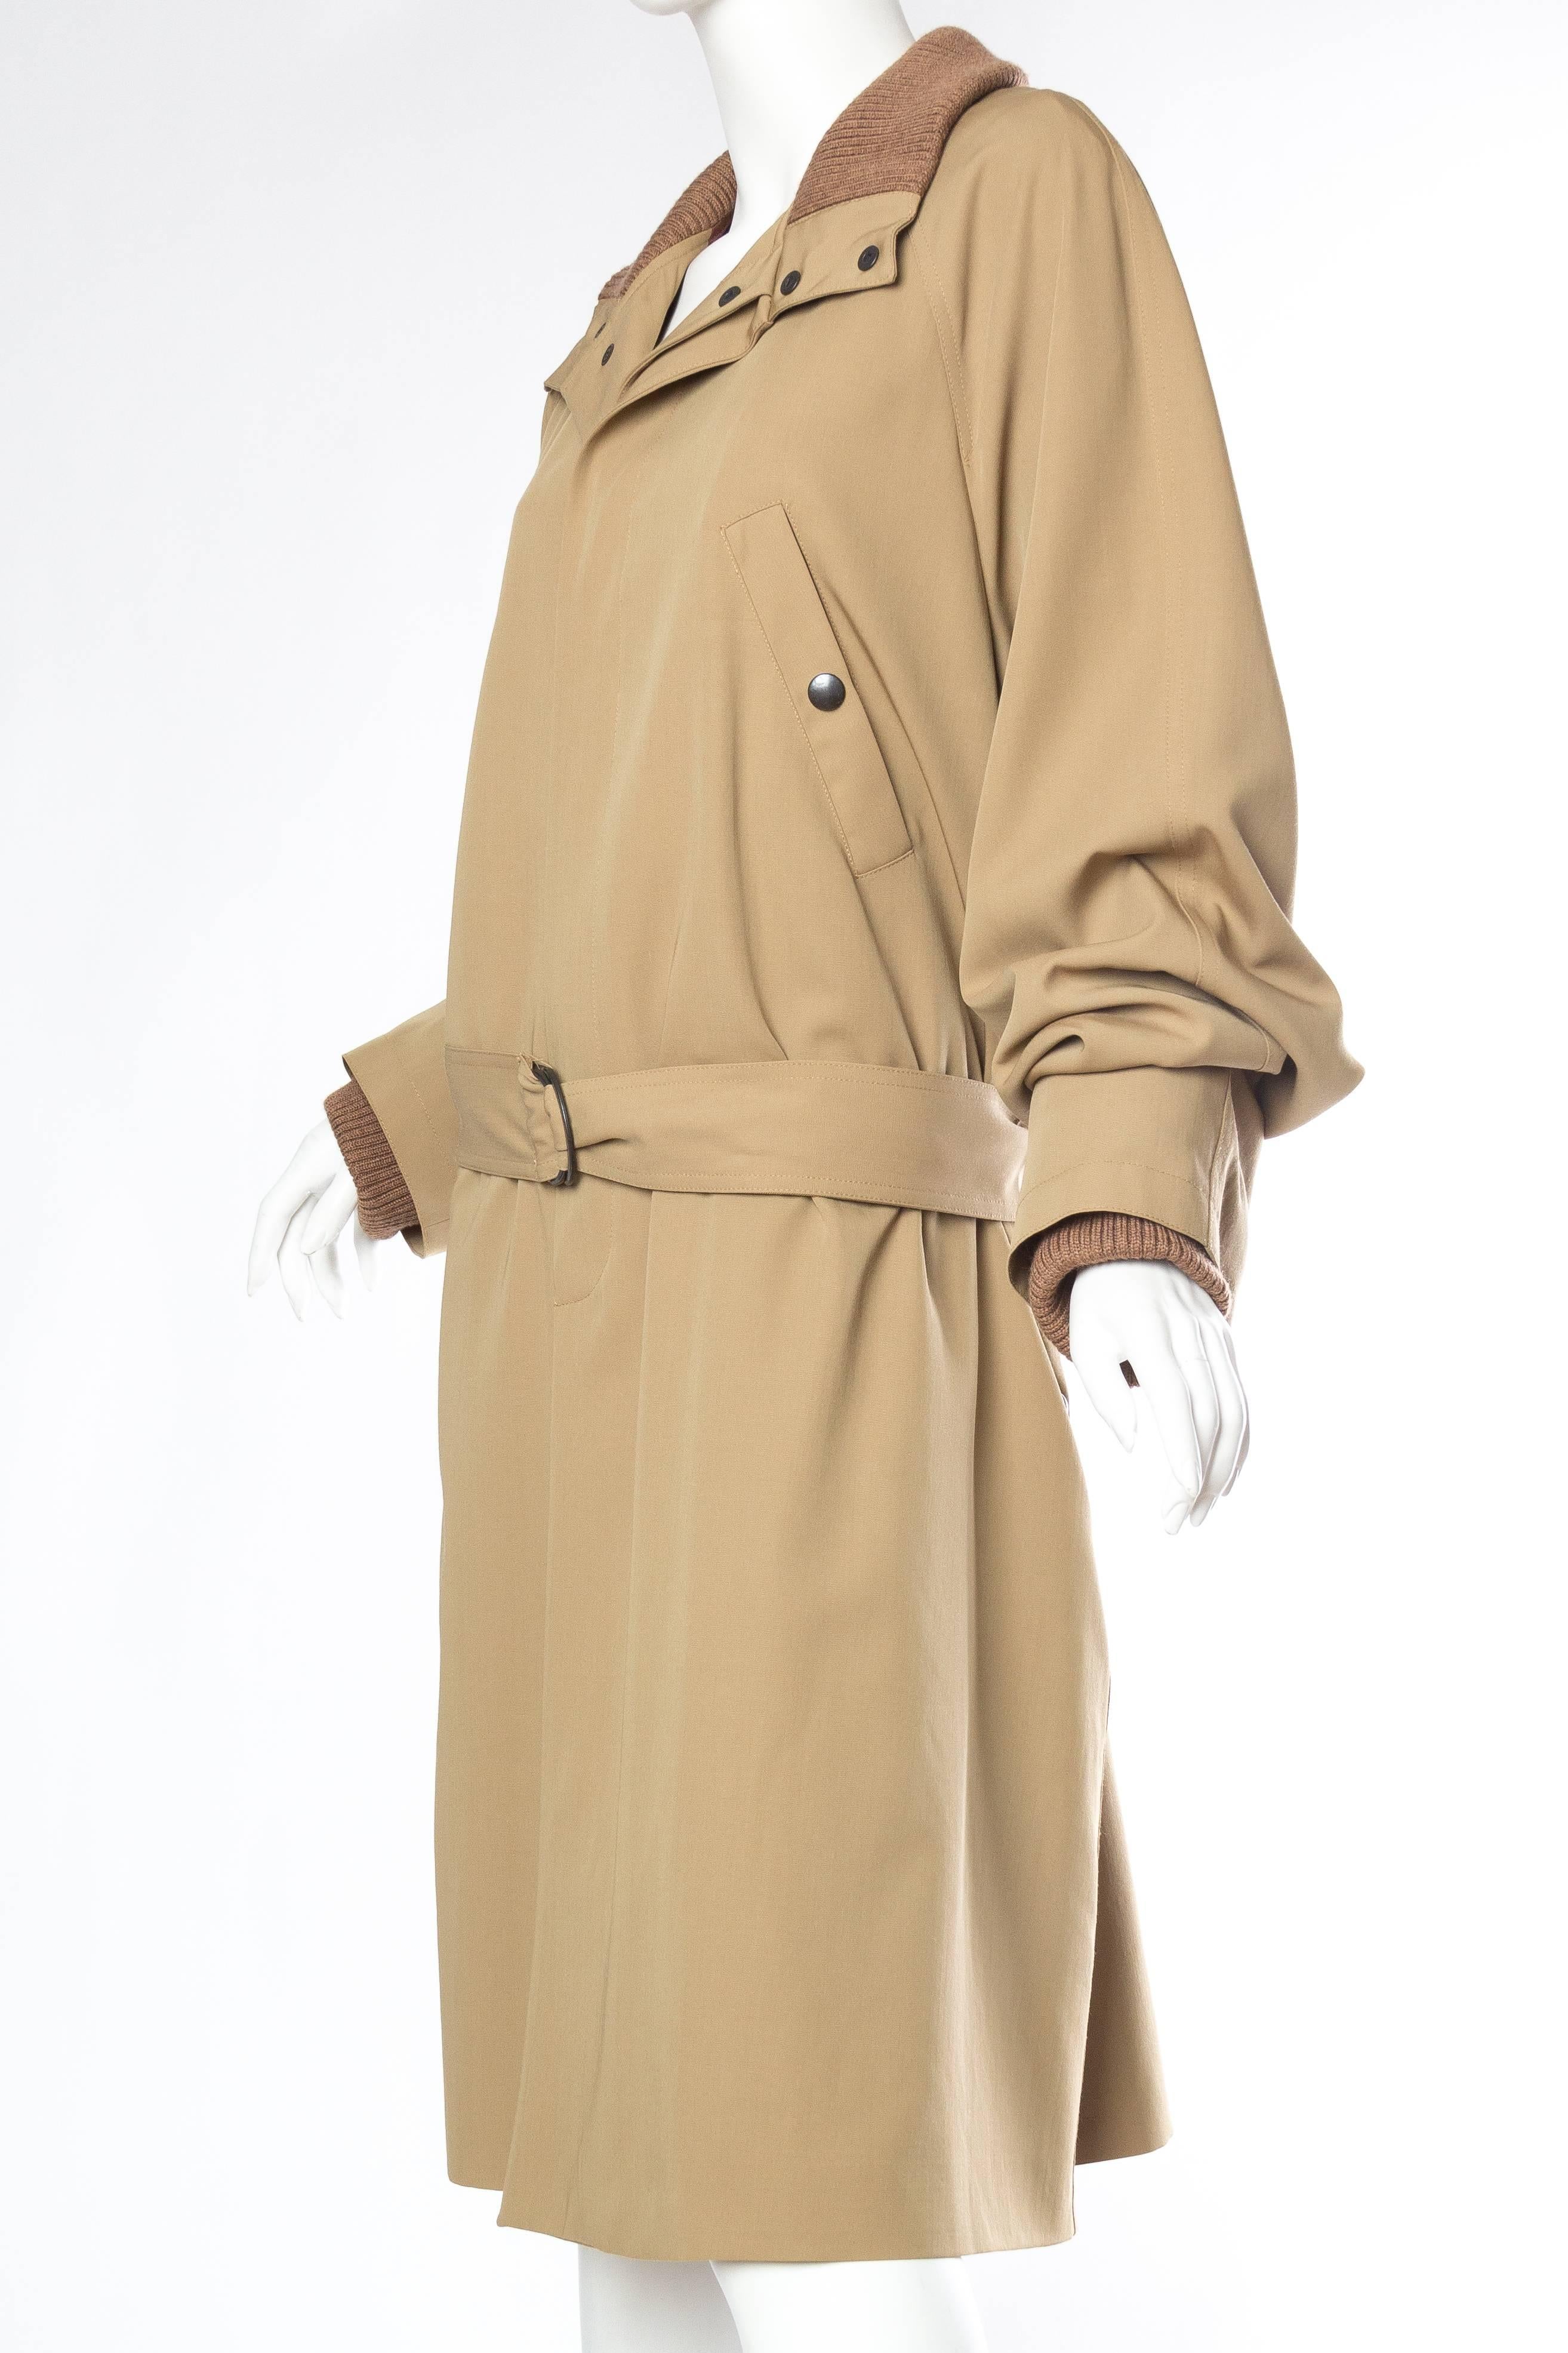 Jean Paul Gaultier Unisex Collection Astrology Trenchcoat  1